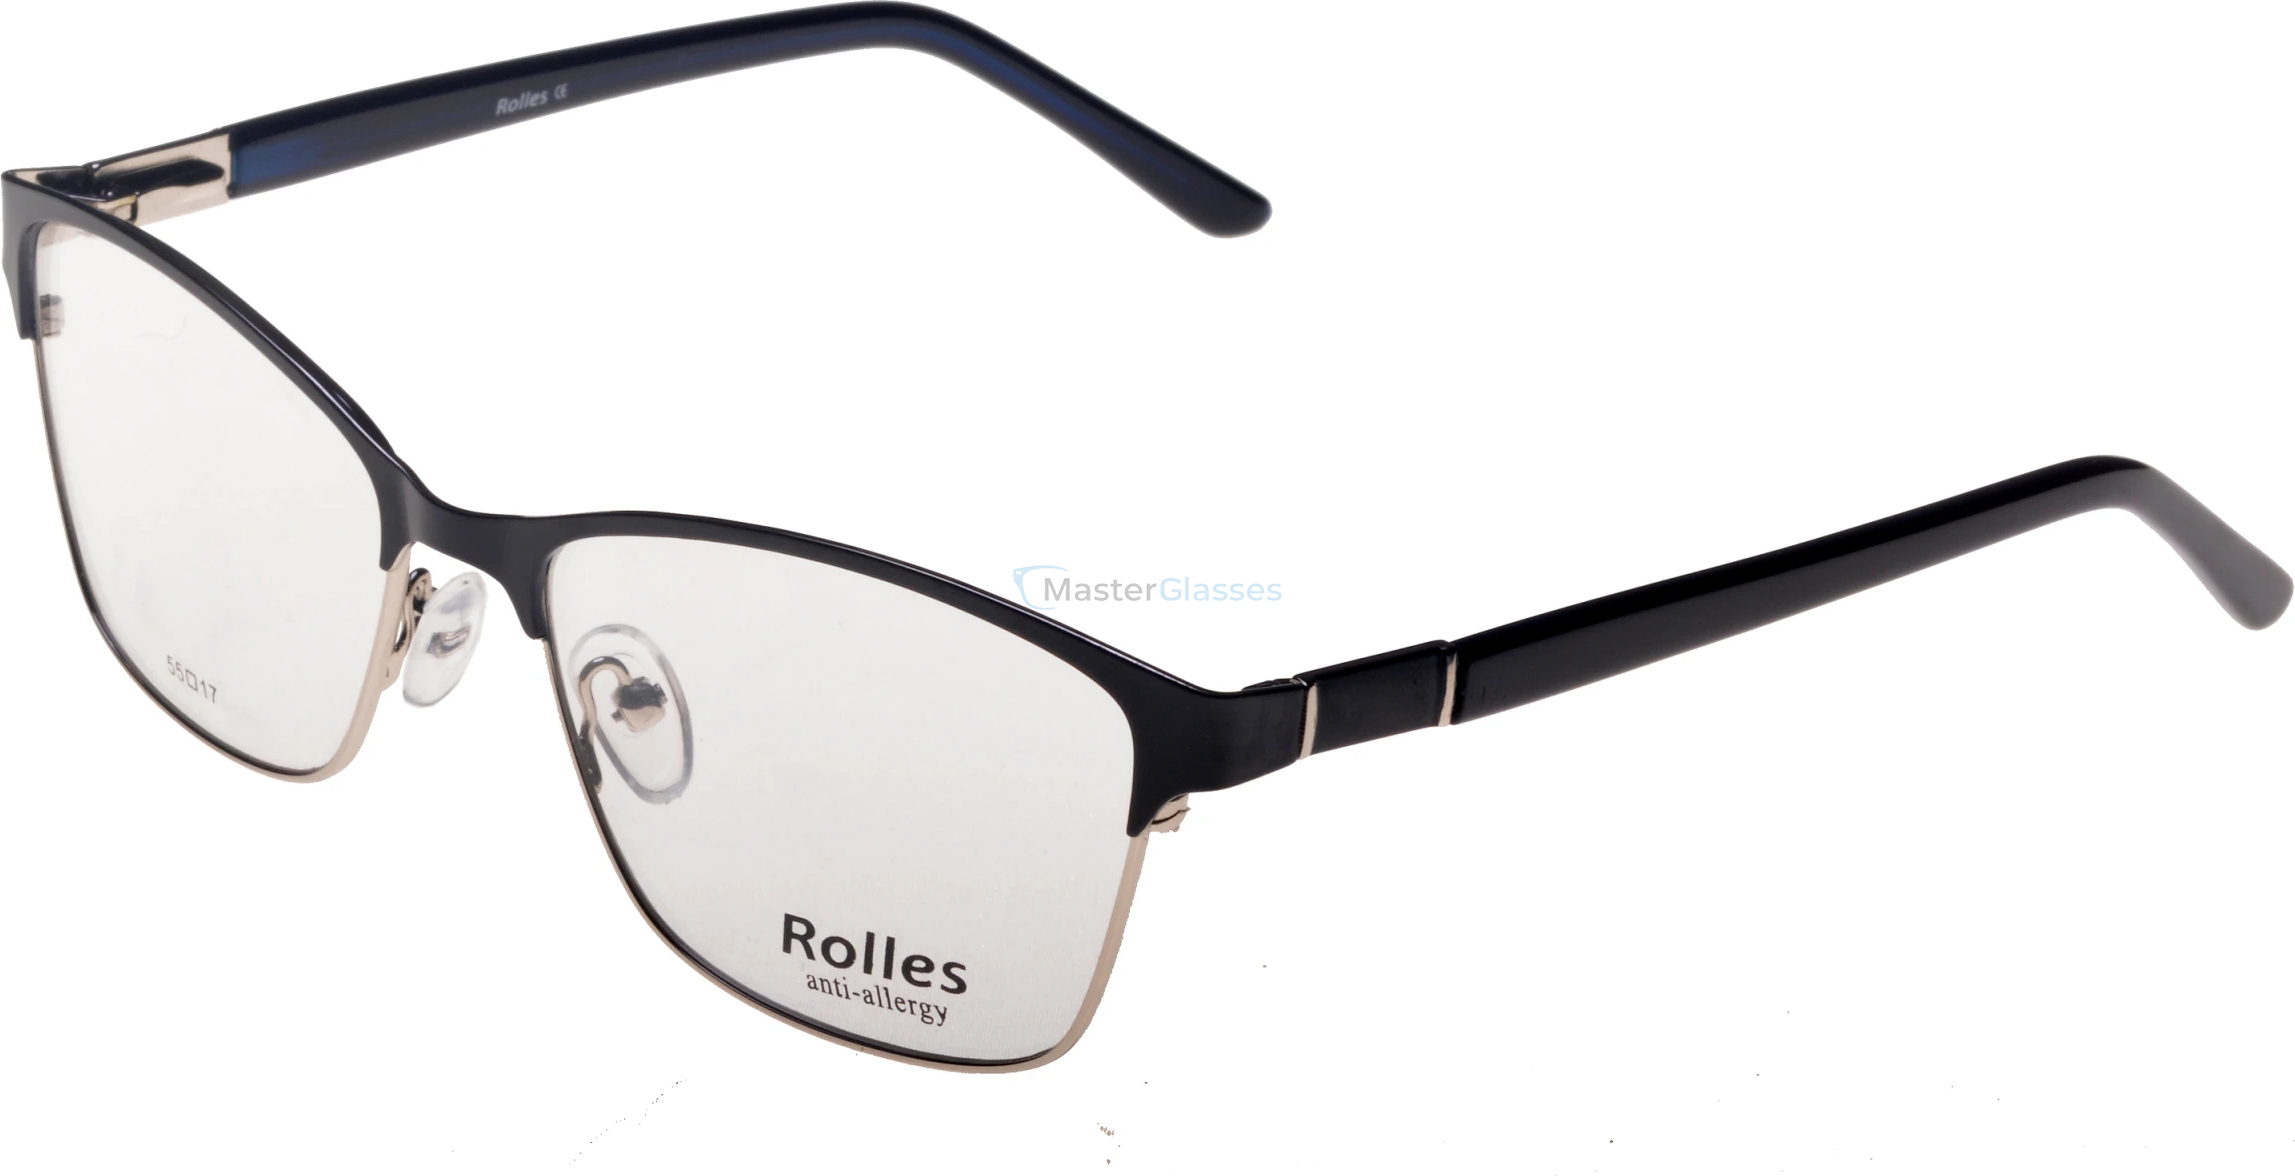  Rolles 583 01